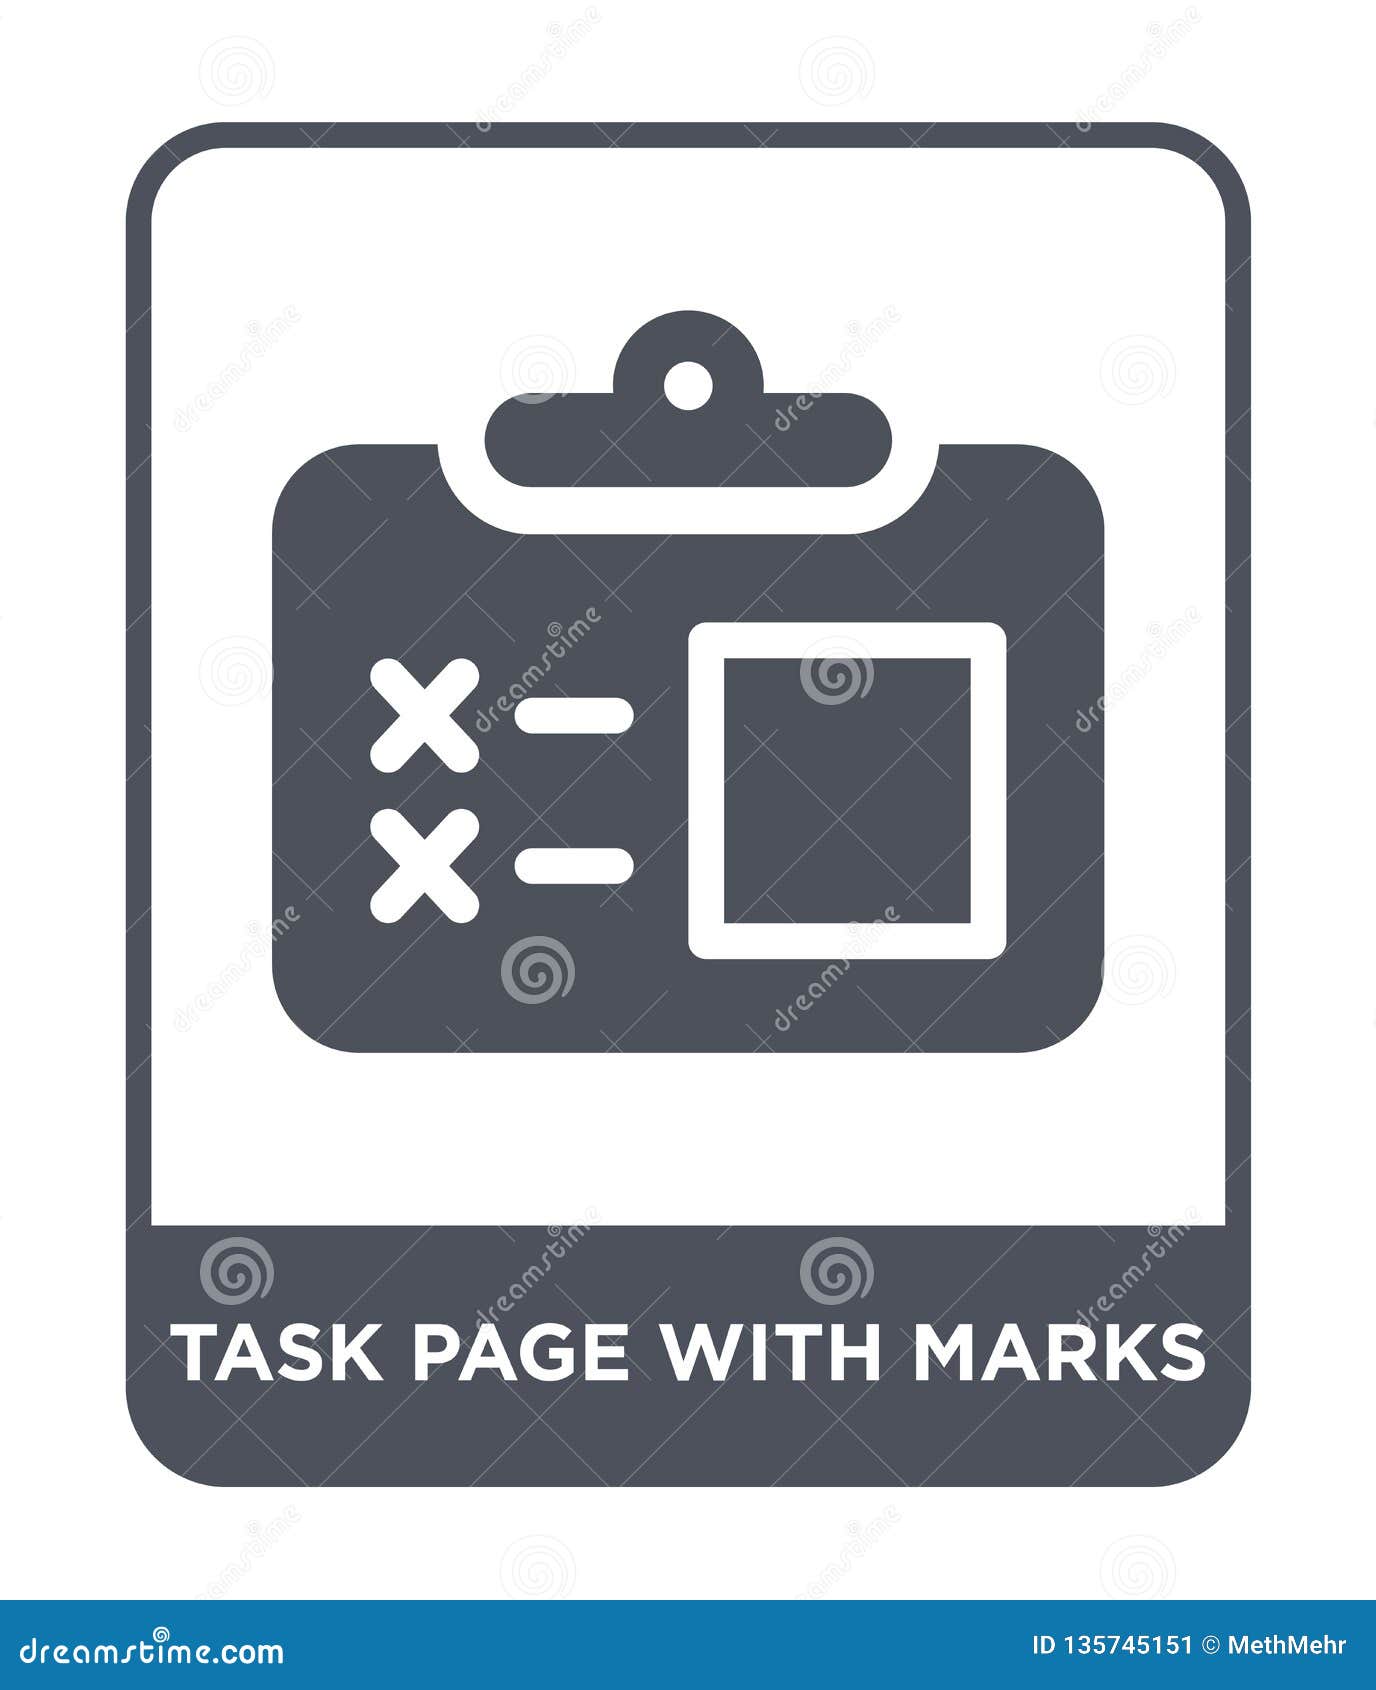 task page with marks icon in trendy design style. task page with marks icon isolated on white background. task page with marks vector icon simple and modern flat symbol